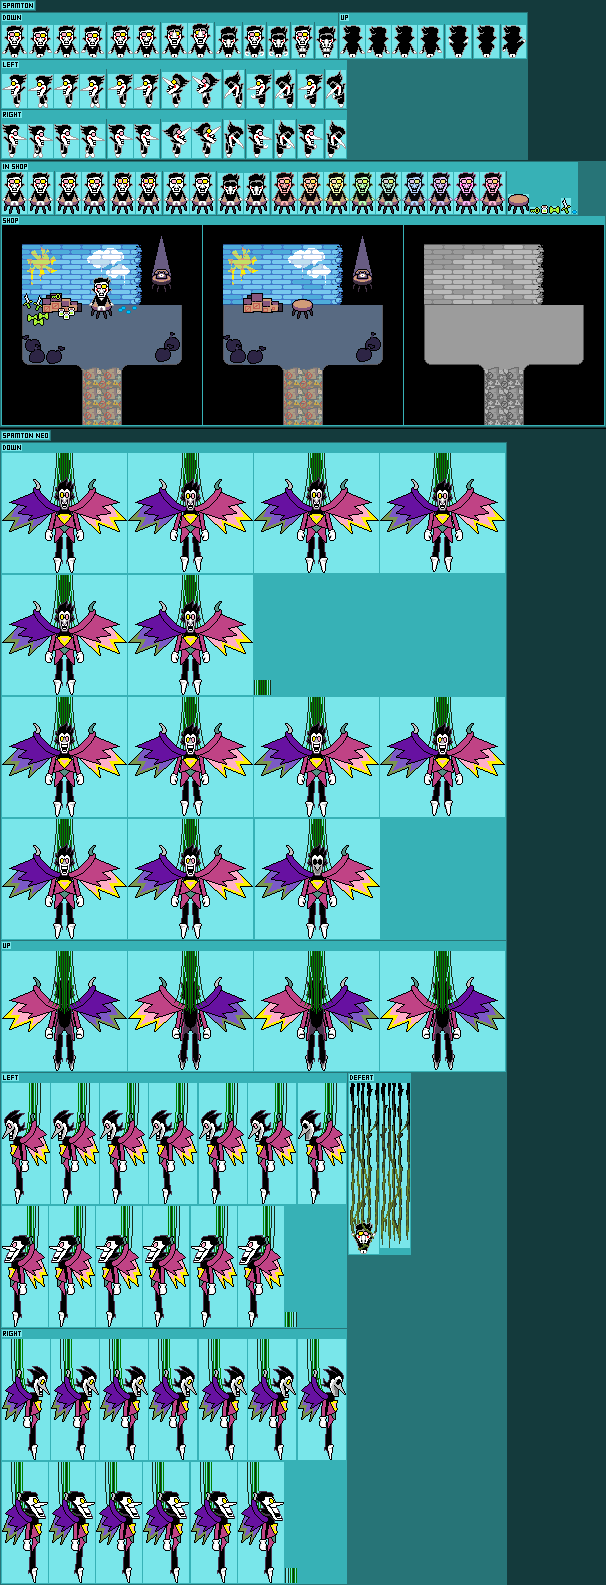 Deltarune Customs - Spamton (Expanded)